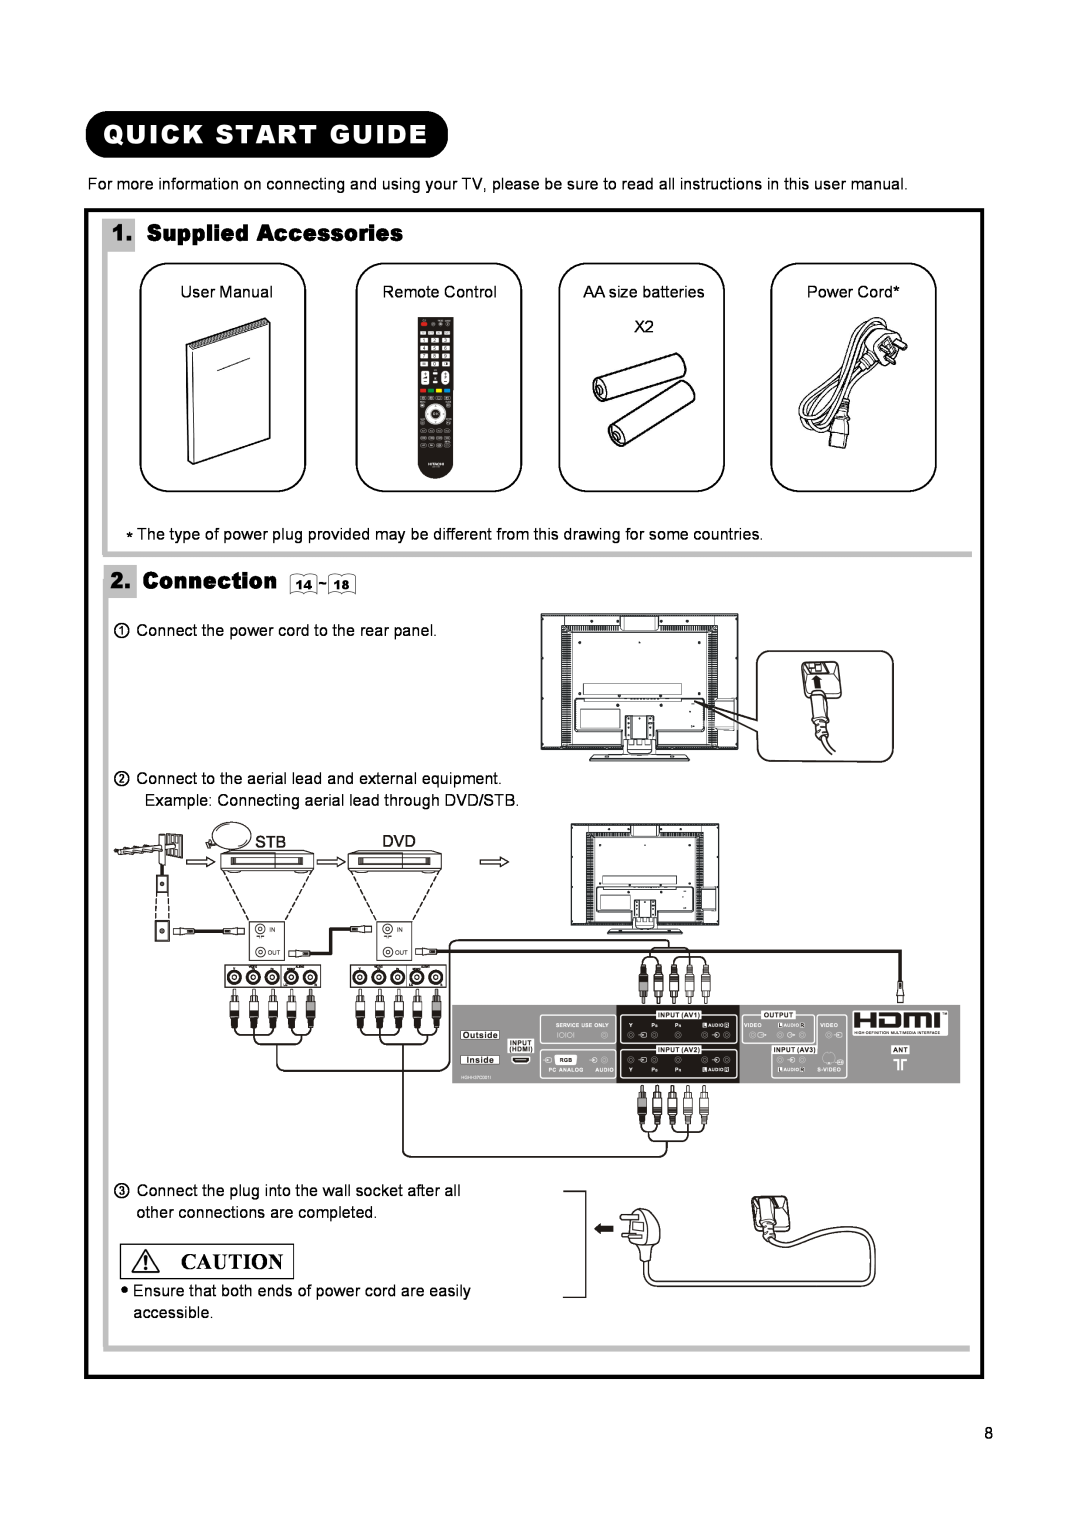 Hitachi L26A01A, L37A01A, L32A01A user manual Quick Start Guide, Supplied Accessories, Connection 14 ~ 